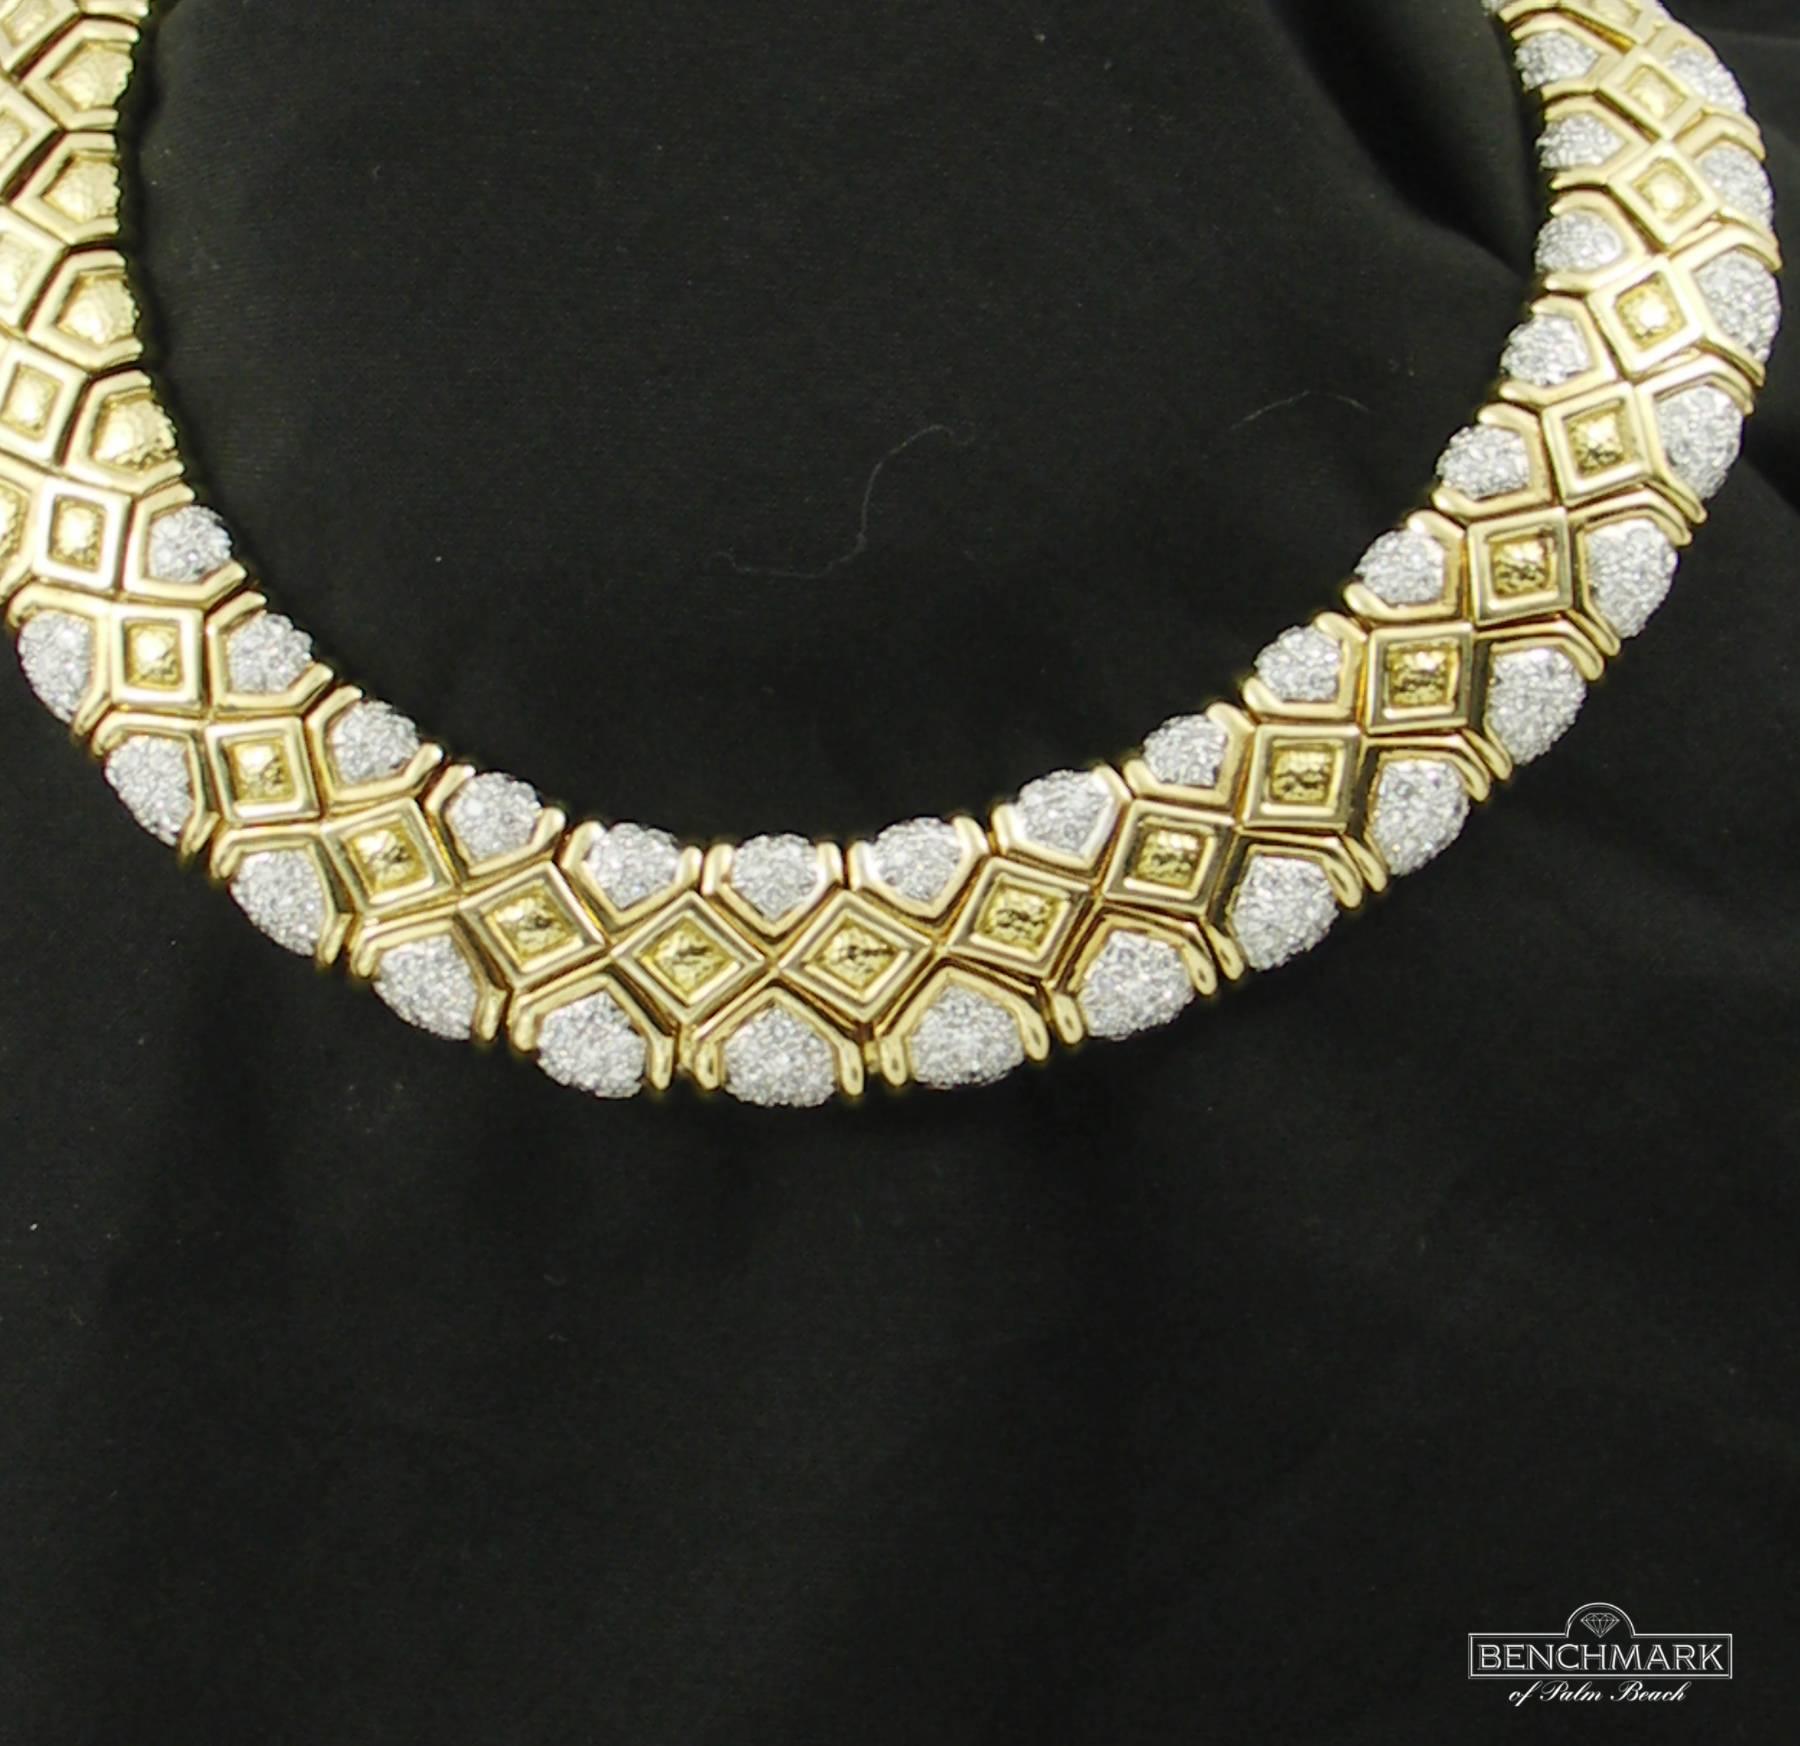 An 18K yellow gold necklace centered around a geometric design highlighted in polished gold, with the body of the necklace being hammer finished. The 17 links in the center are set top and bottom with round brilliant cut diamonds weighing a total of